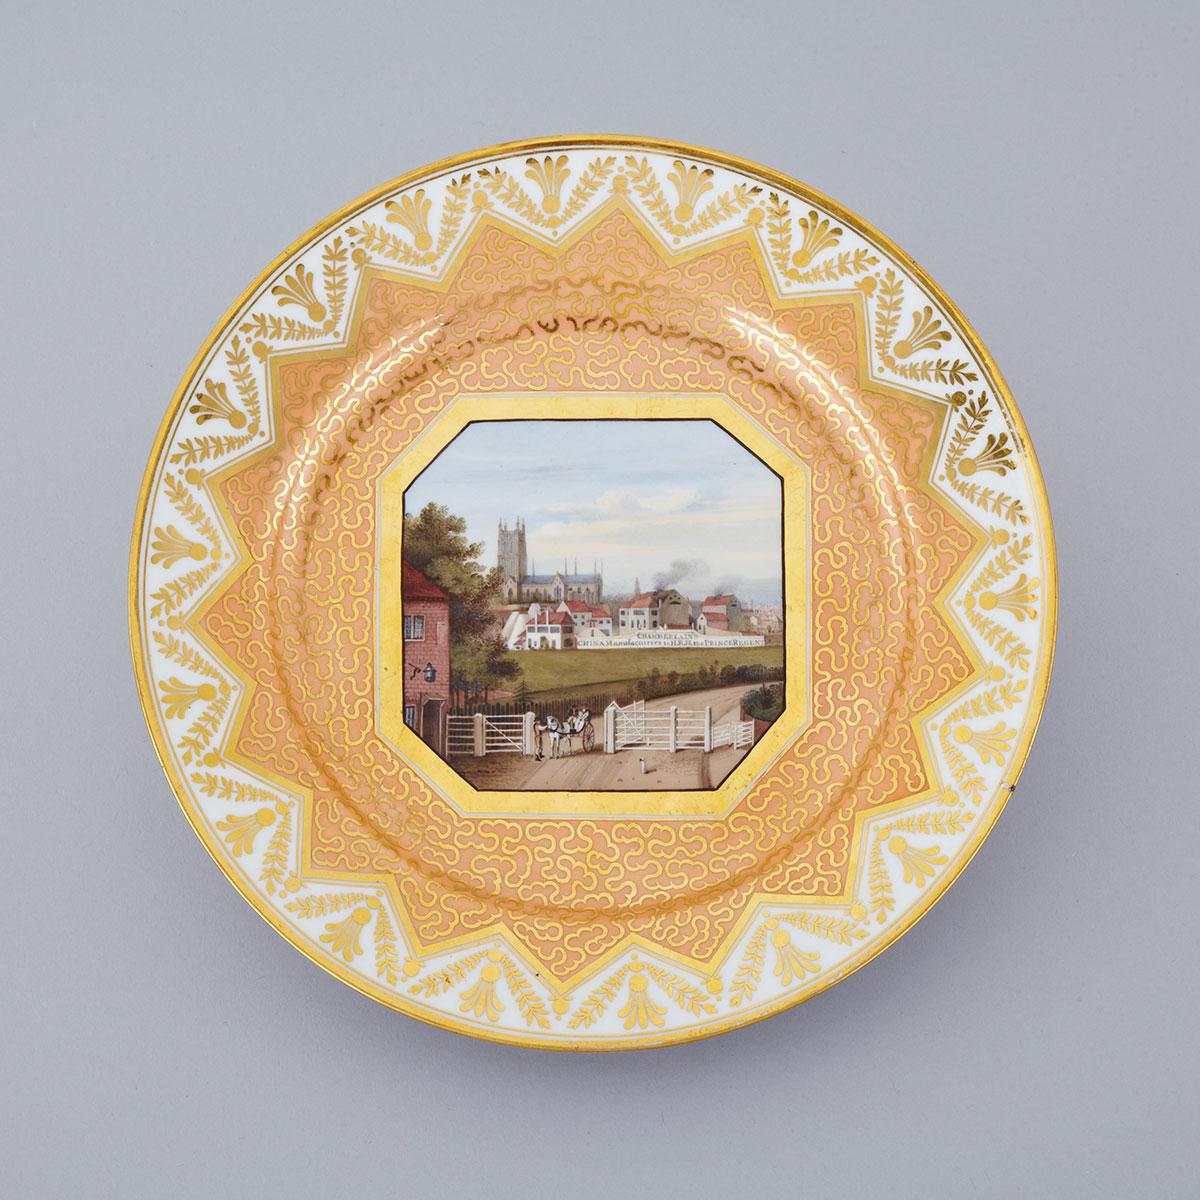 Chamberlains Worcester Topographical Plate, c.1816-19